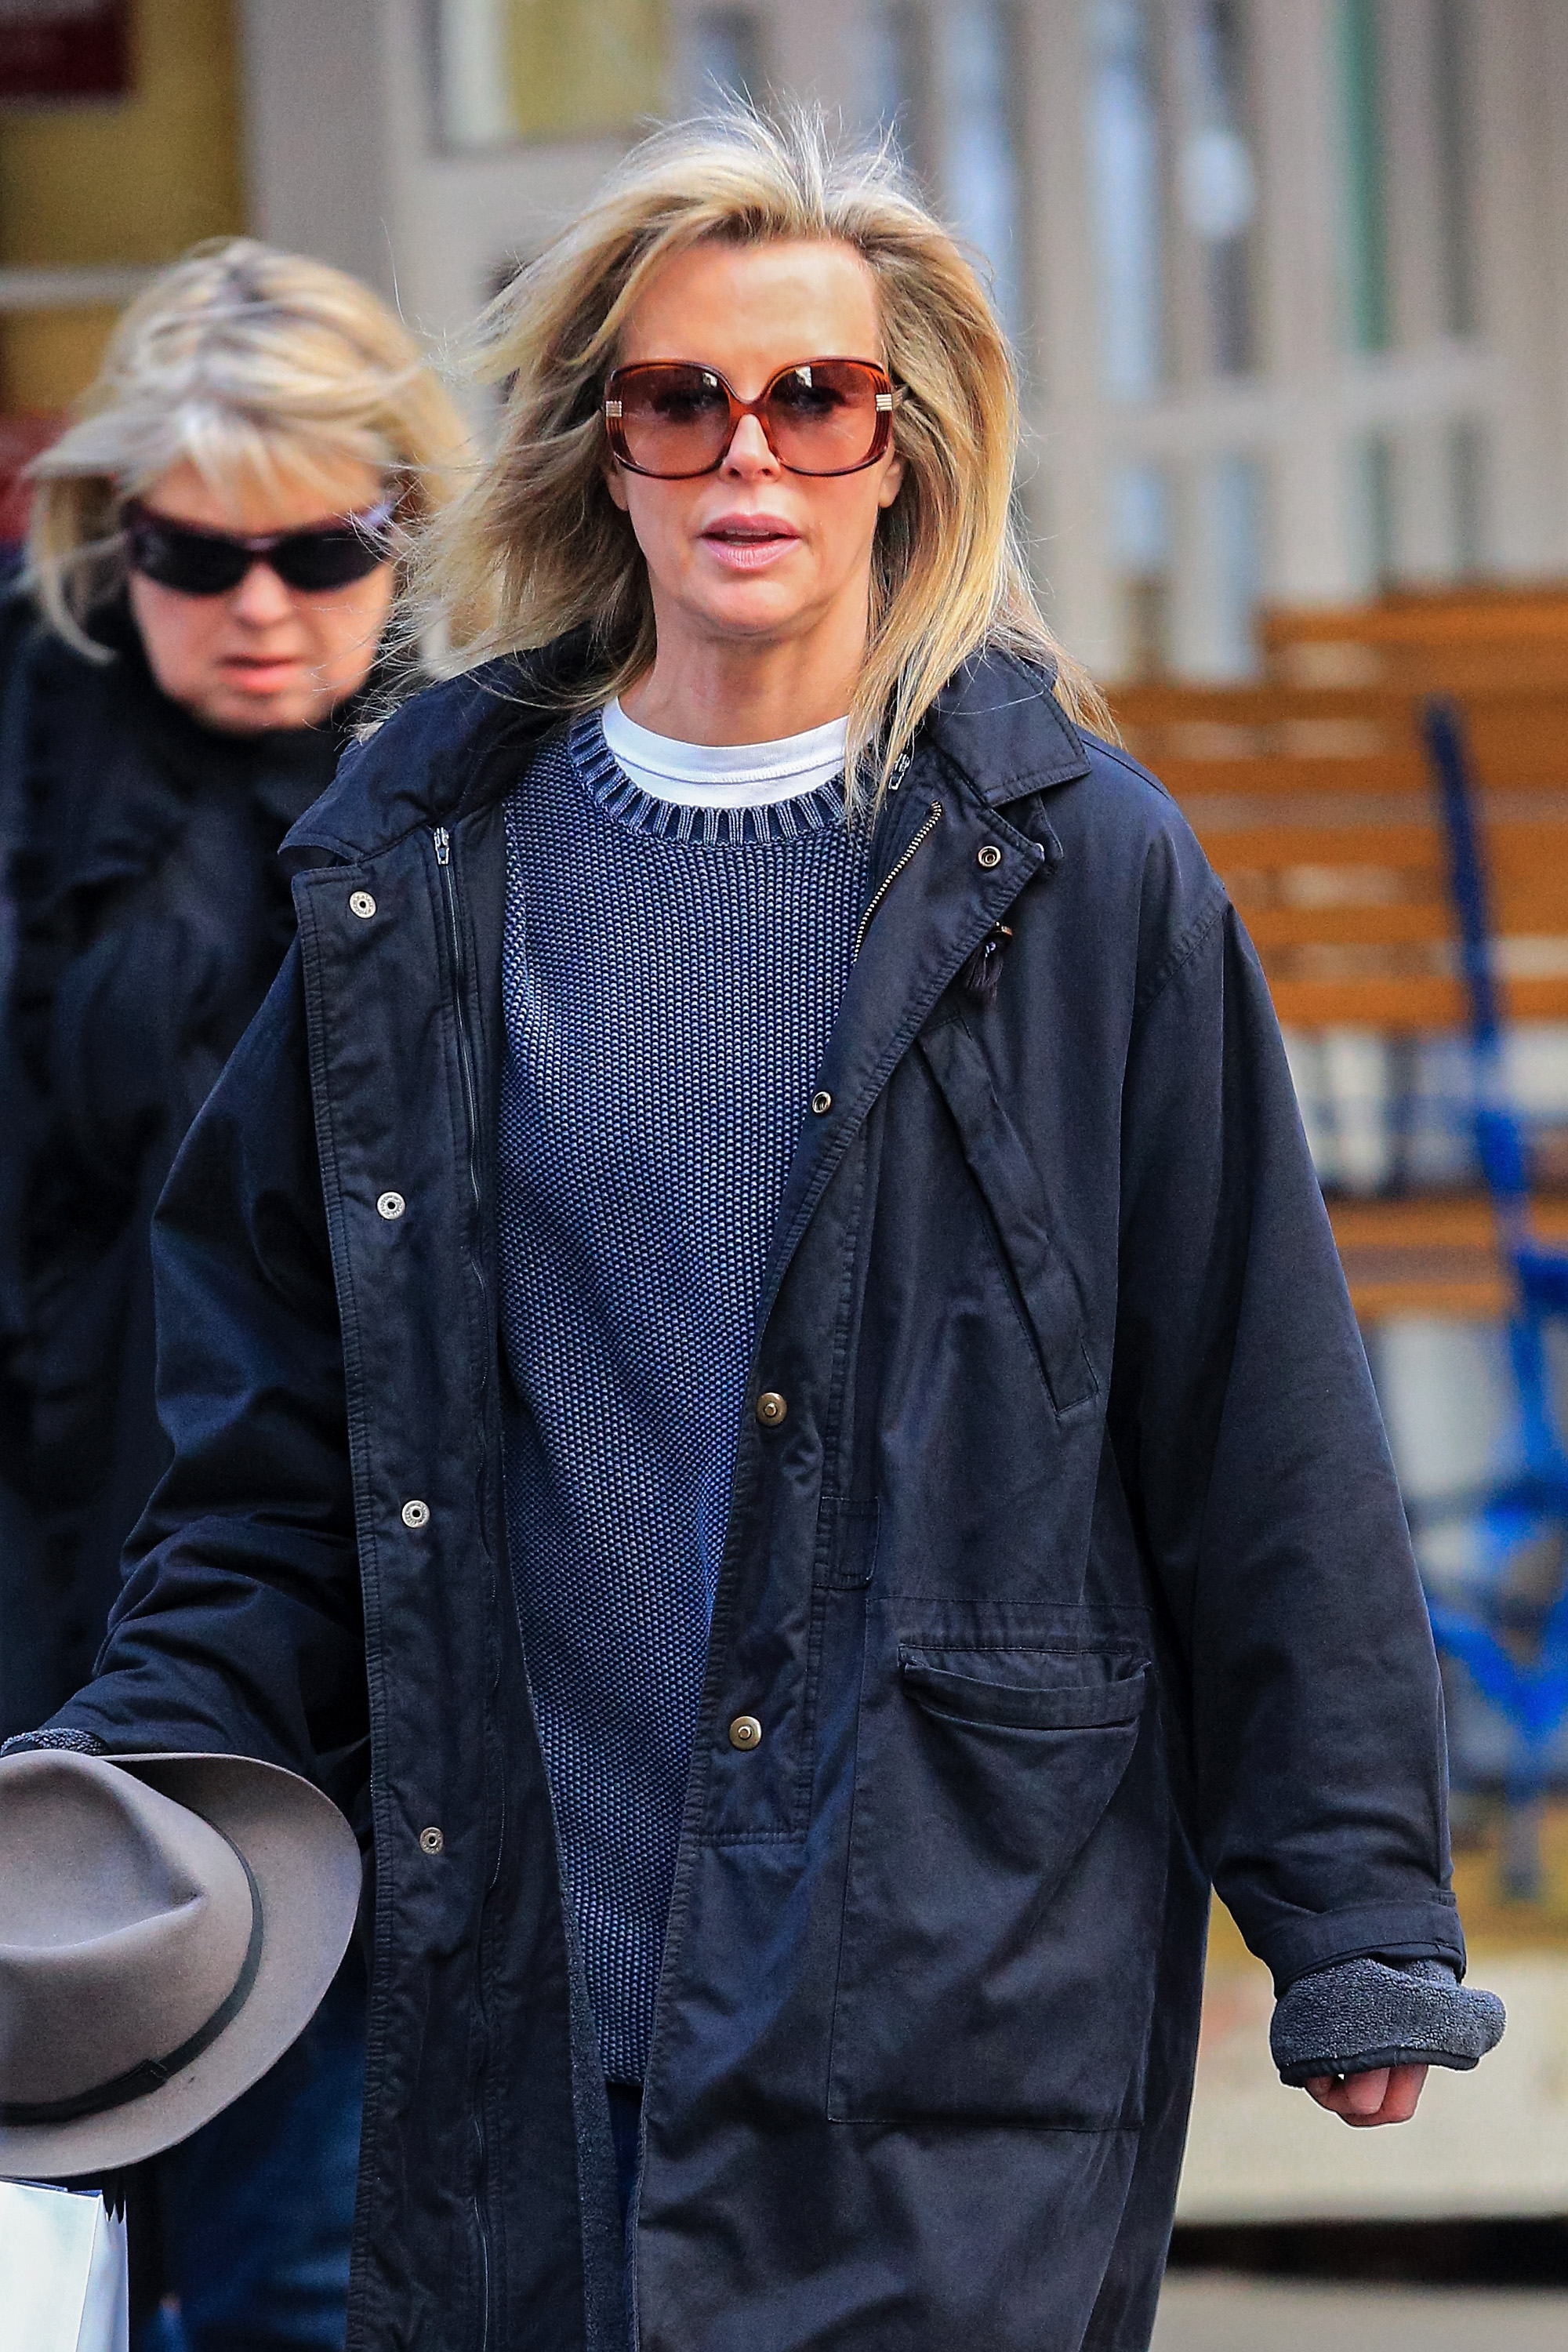 Kim Basinger spotted out in New York City, 2014 | Source: Getty Images